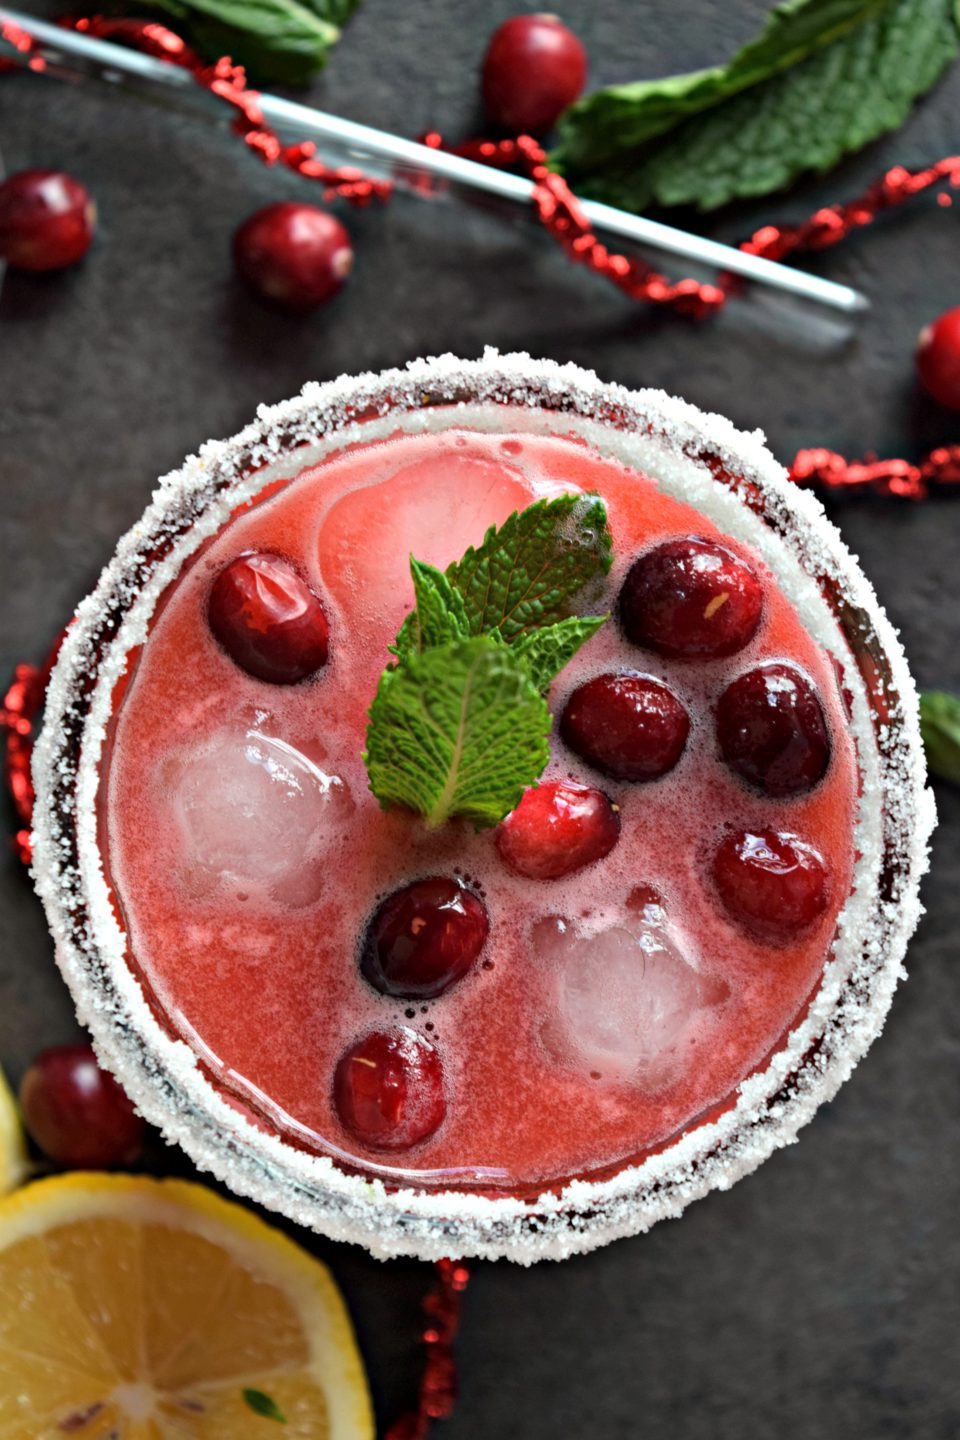 Amortentia in a glass with floating cherries on top